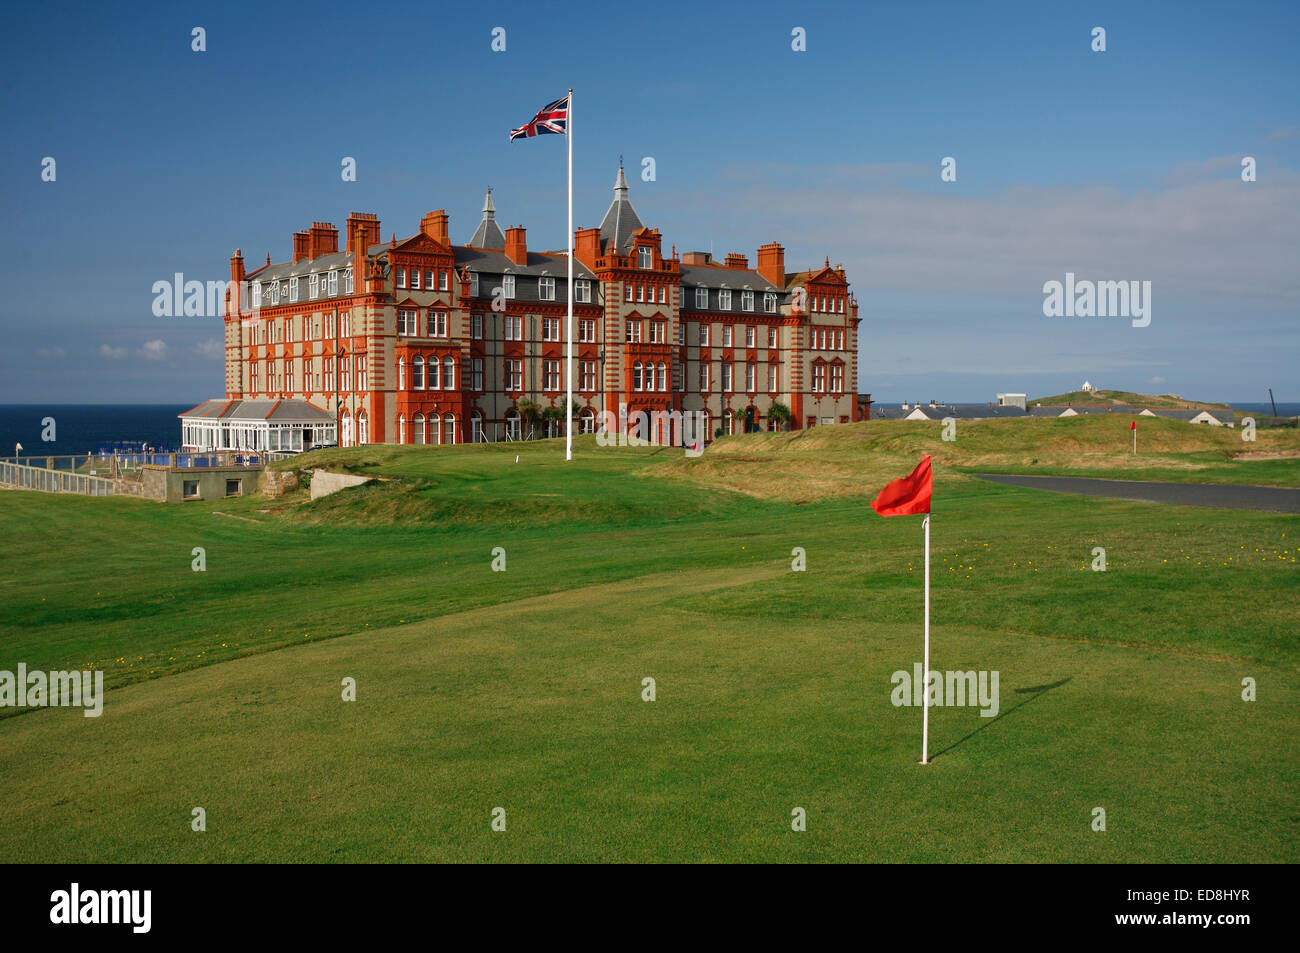 The Headland Hotel, Newquay, Cornwall, sud-ouest de l'Angleterre Banque D'Images